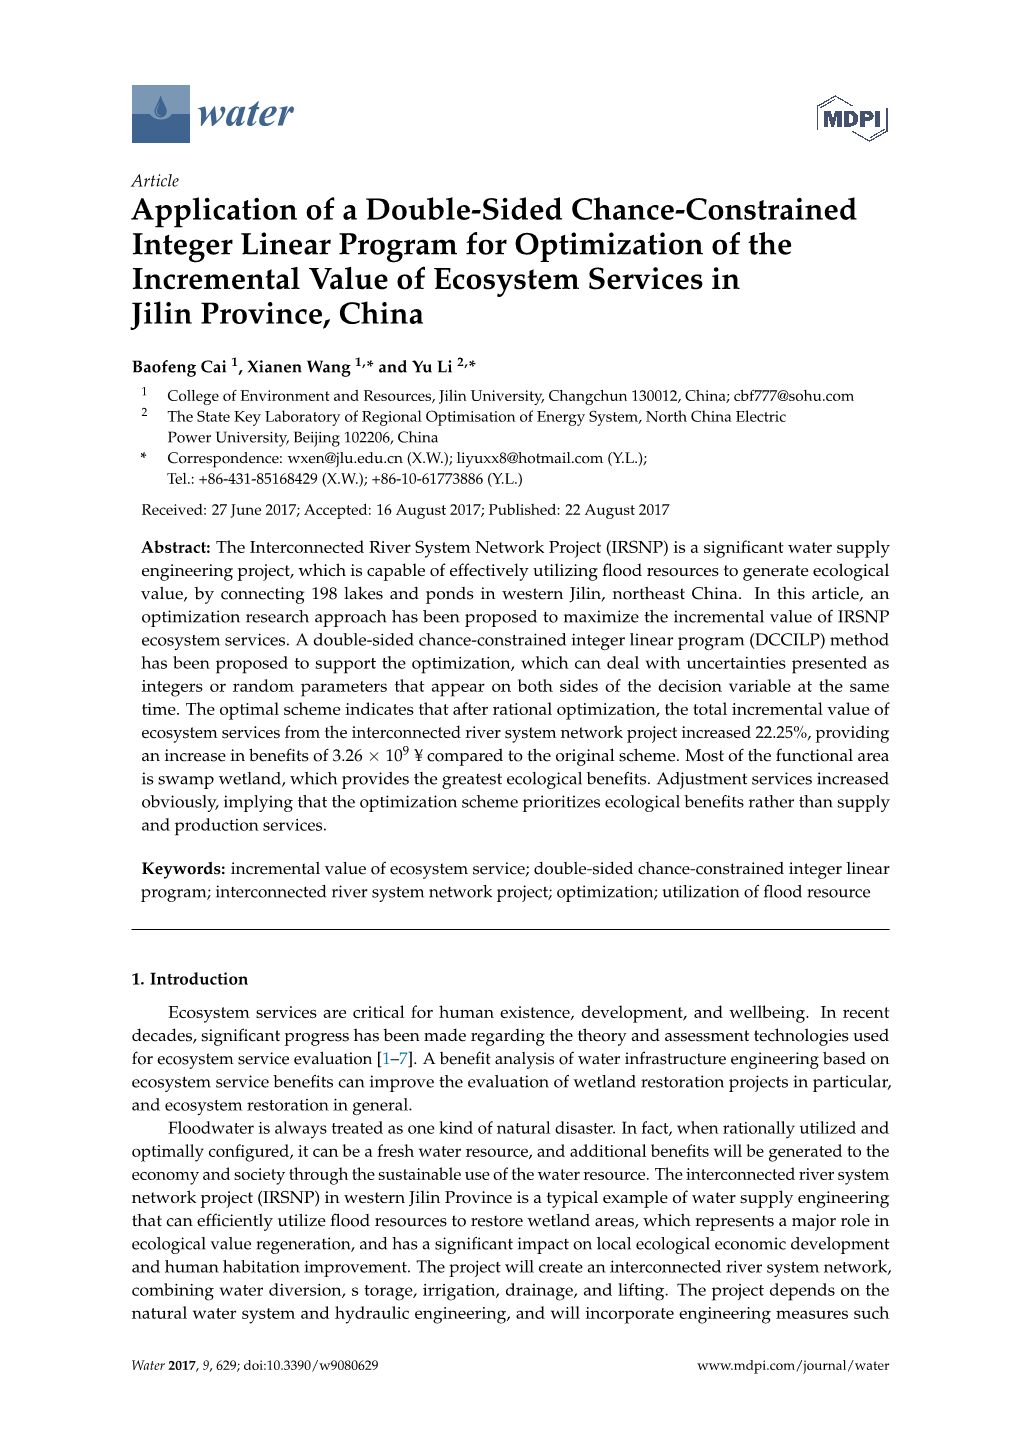 Application of a Double-Sided Chance-Constrained Integer Linear Program for Optimization of the Incremental Value of Ecosystem Services in Jilin Province, China